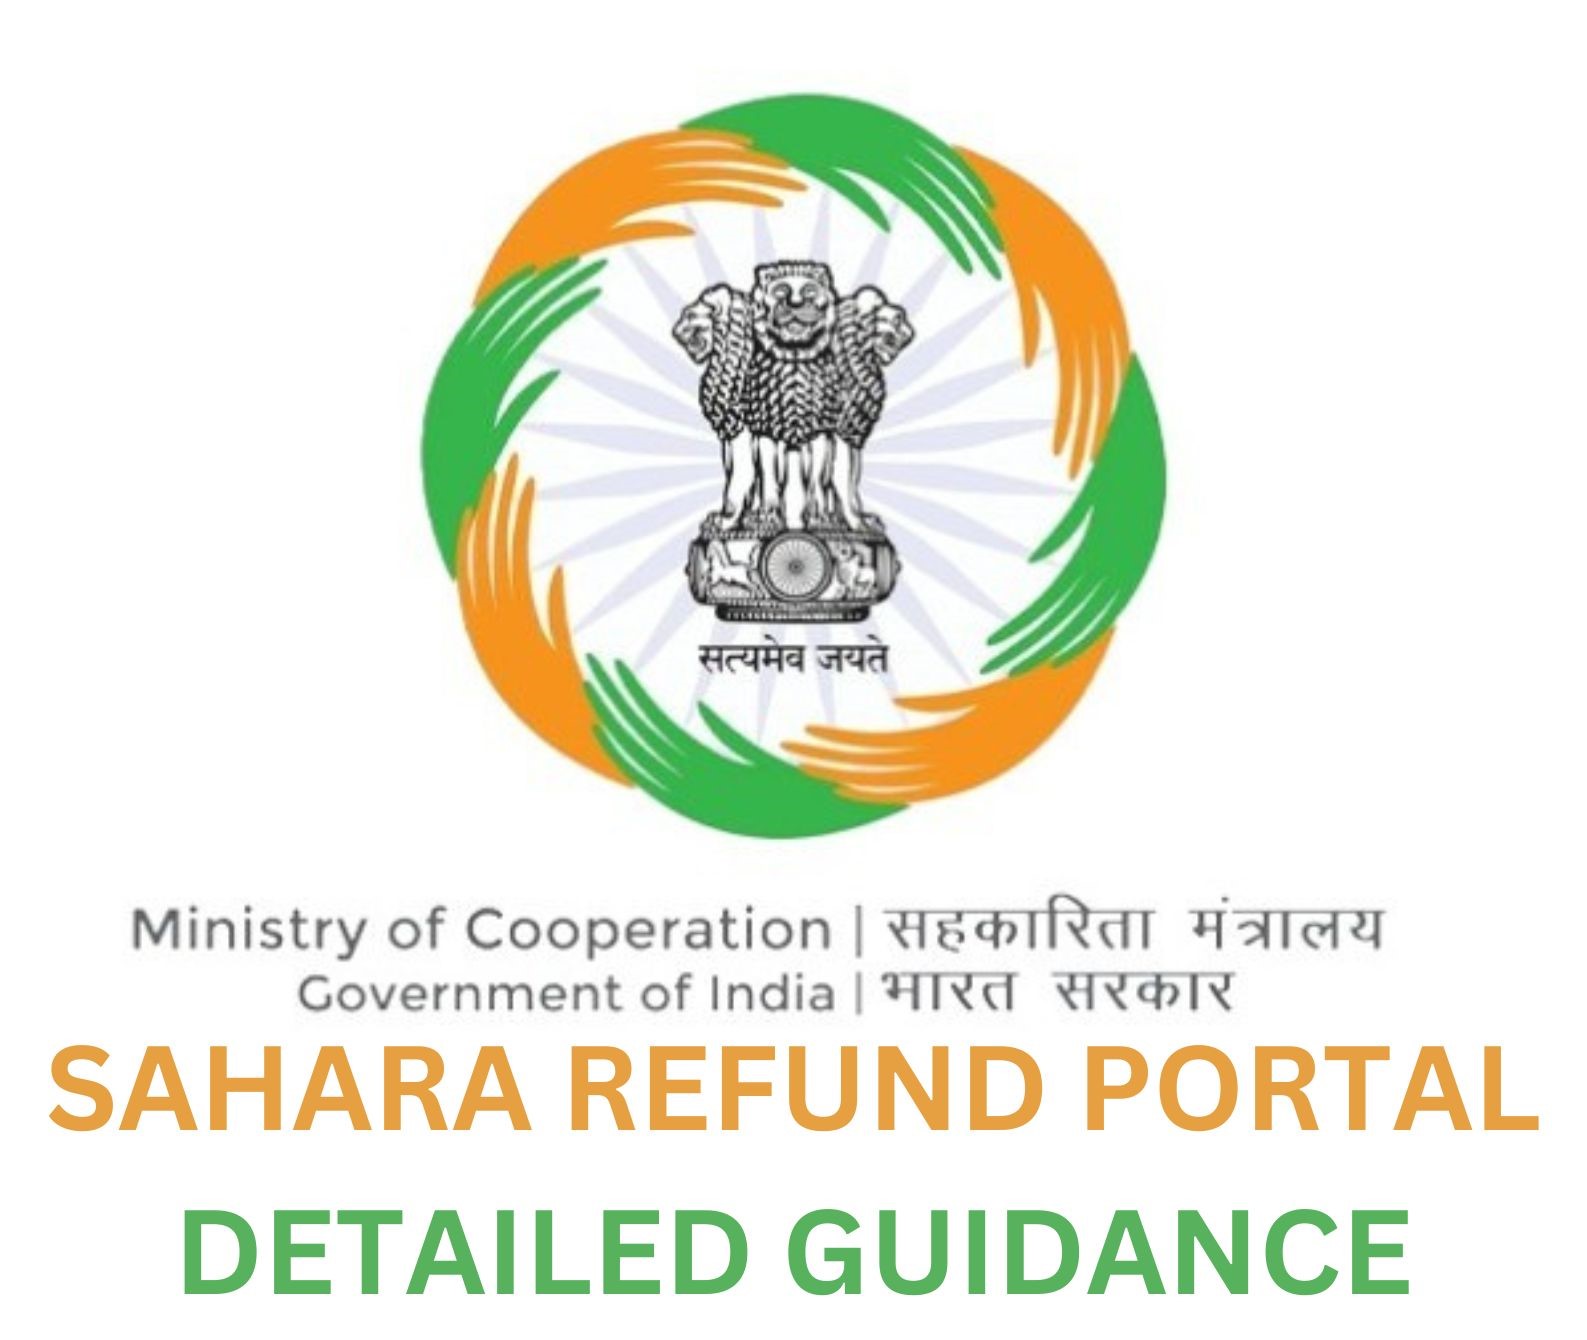 Detailed Guidance About Sahara Refund Portal